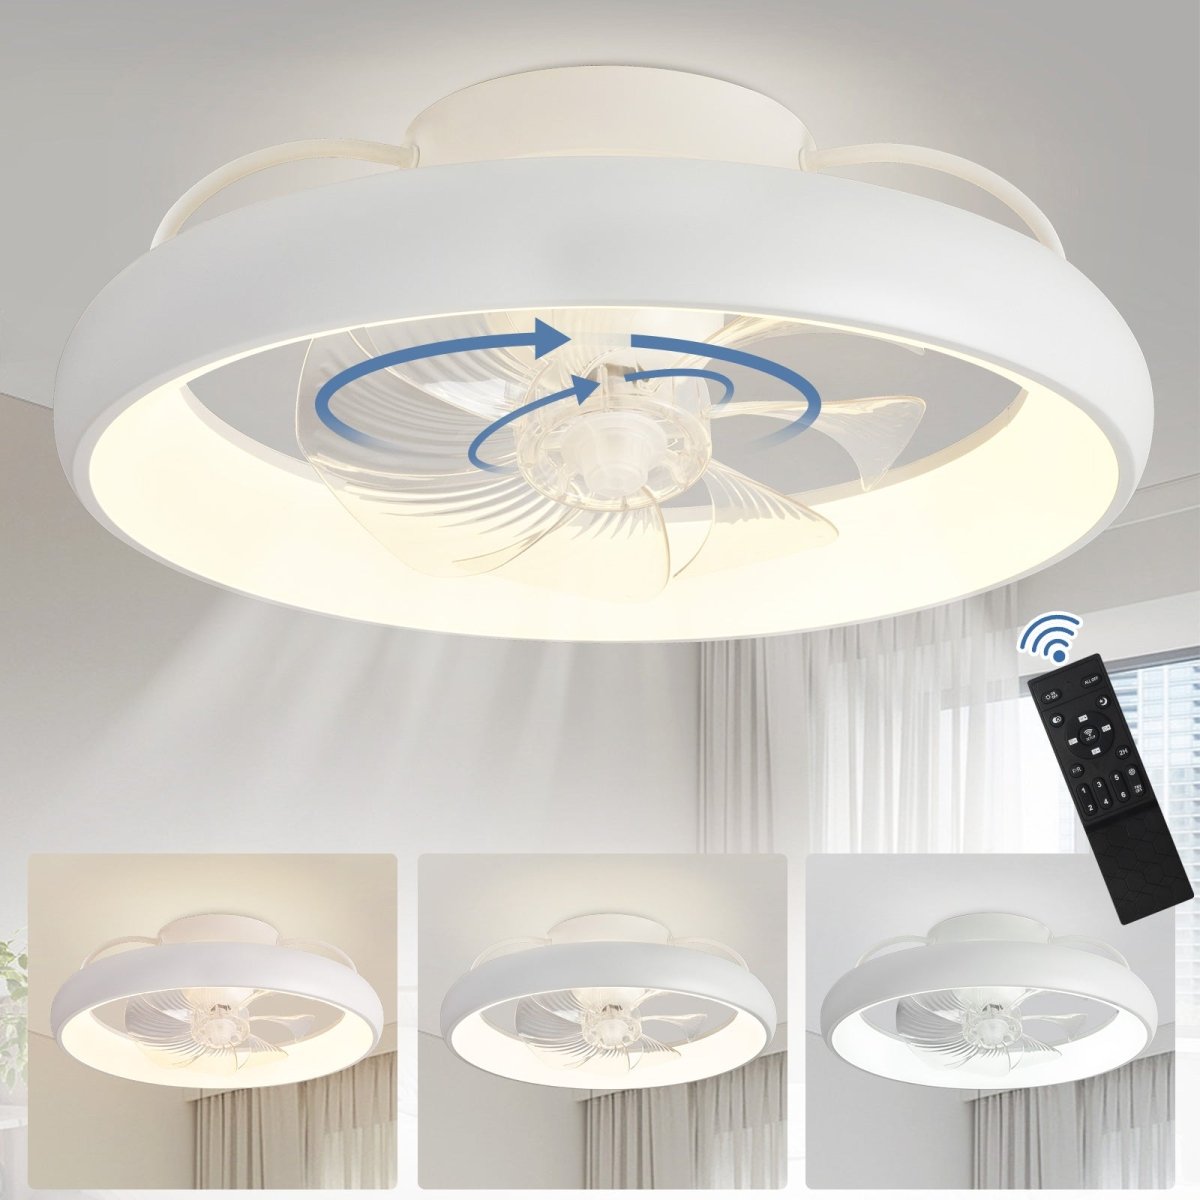 DLLT 360-Degree Rotation LED Flush Mount Ceiling Fan, Modern Low Profile Ceiling Fan with Lights and Remote, Dimmable Reversible Timing, 3CCT Adjustable for Kitchen Bedroom Living Room, White,20 in - WS-FPZ51-33C-WH 2 | DEPULEY